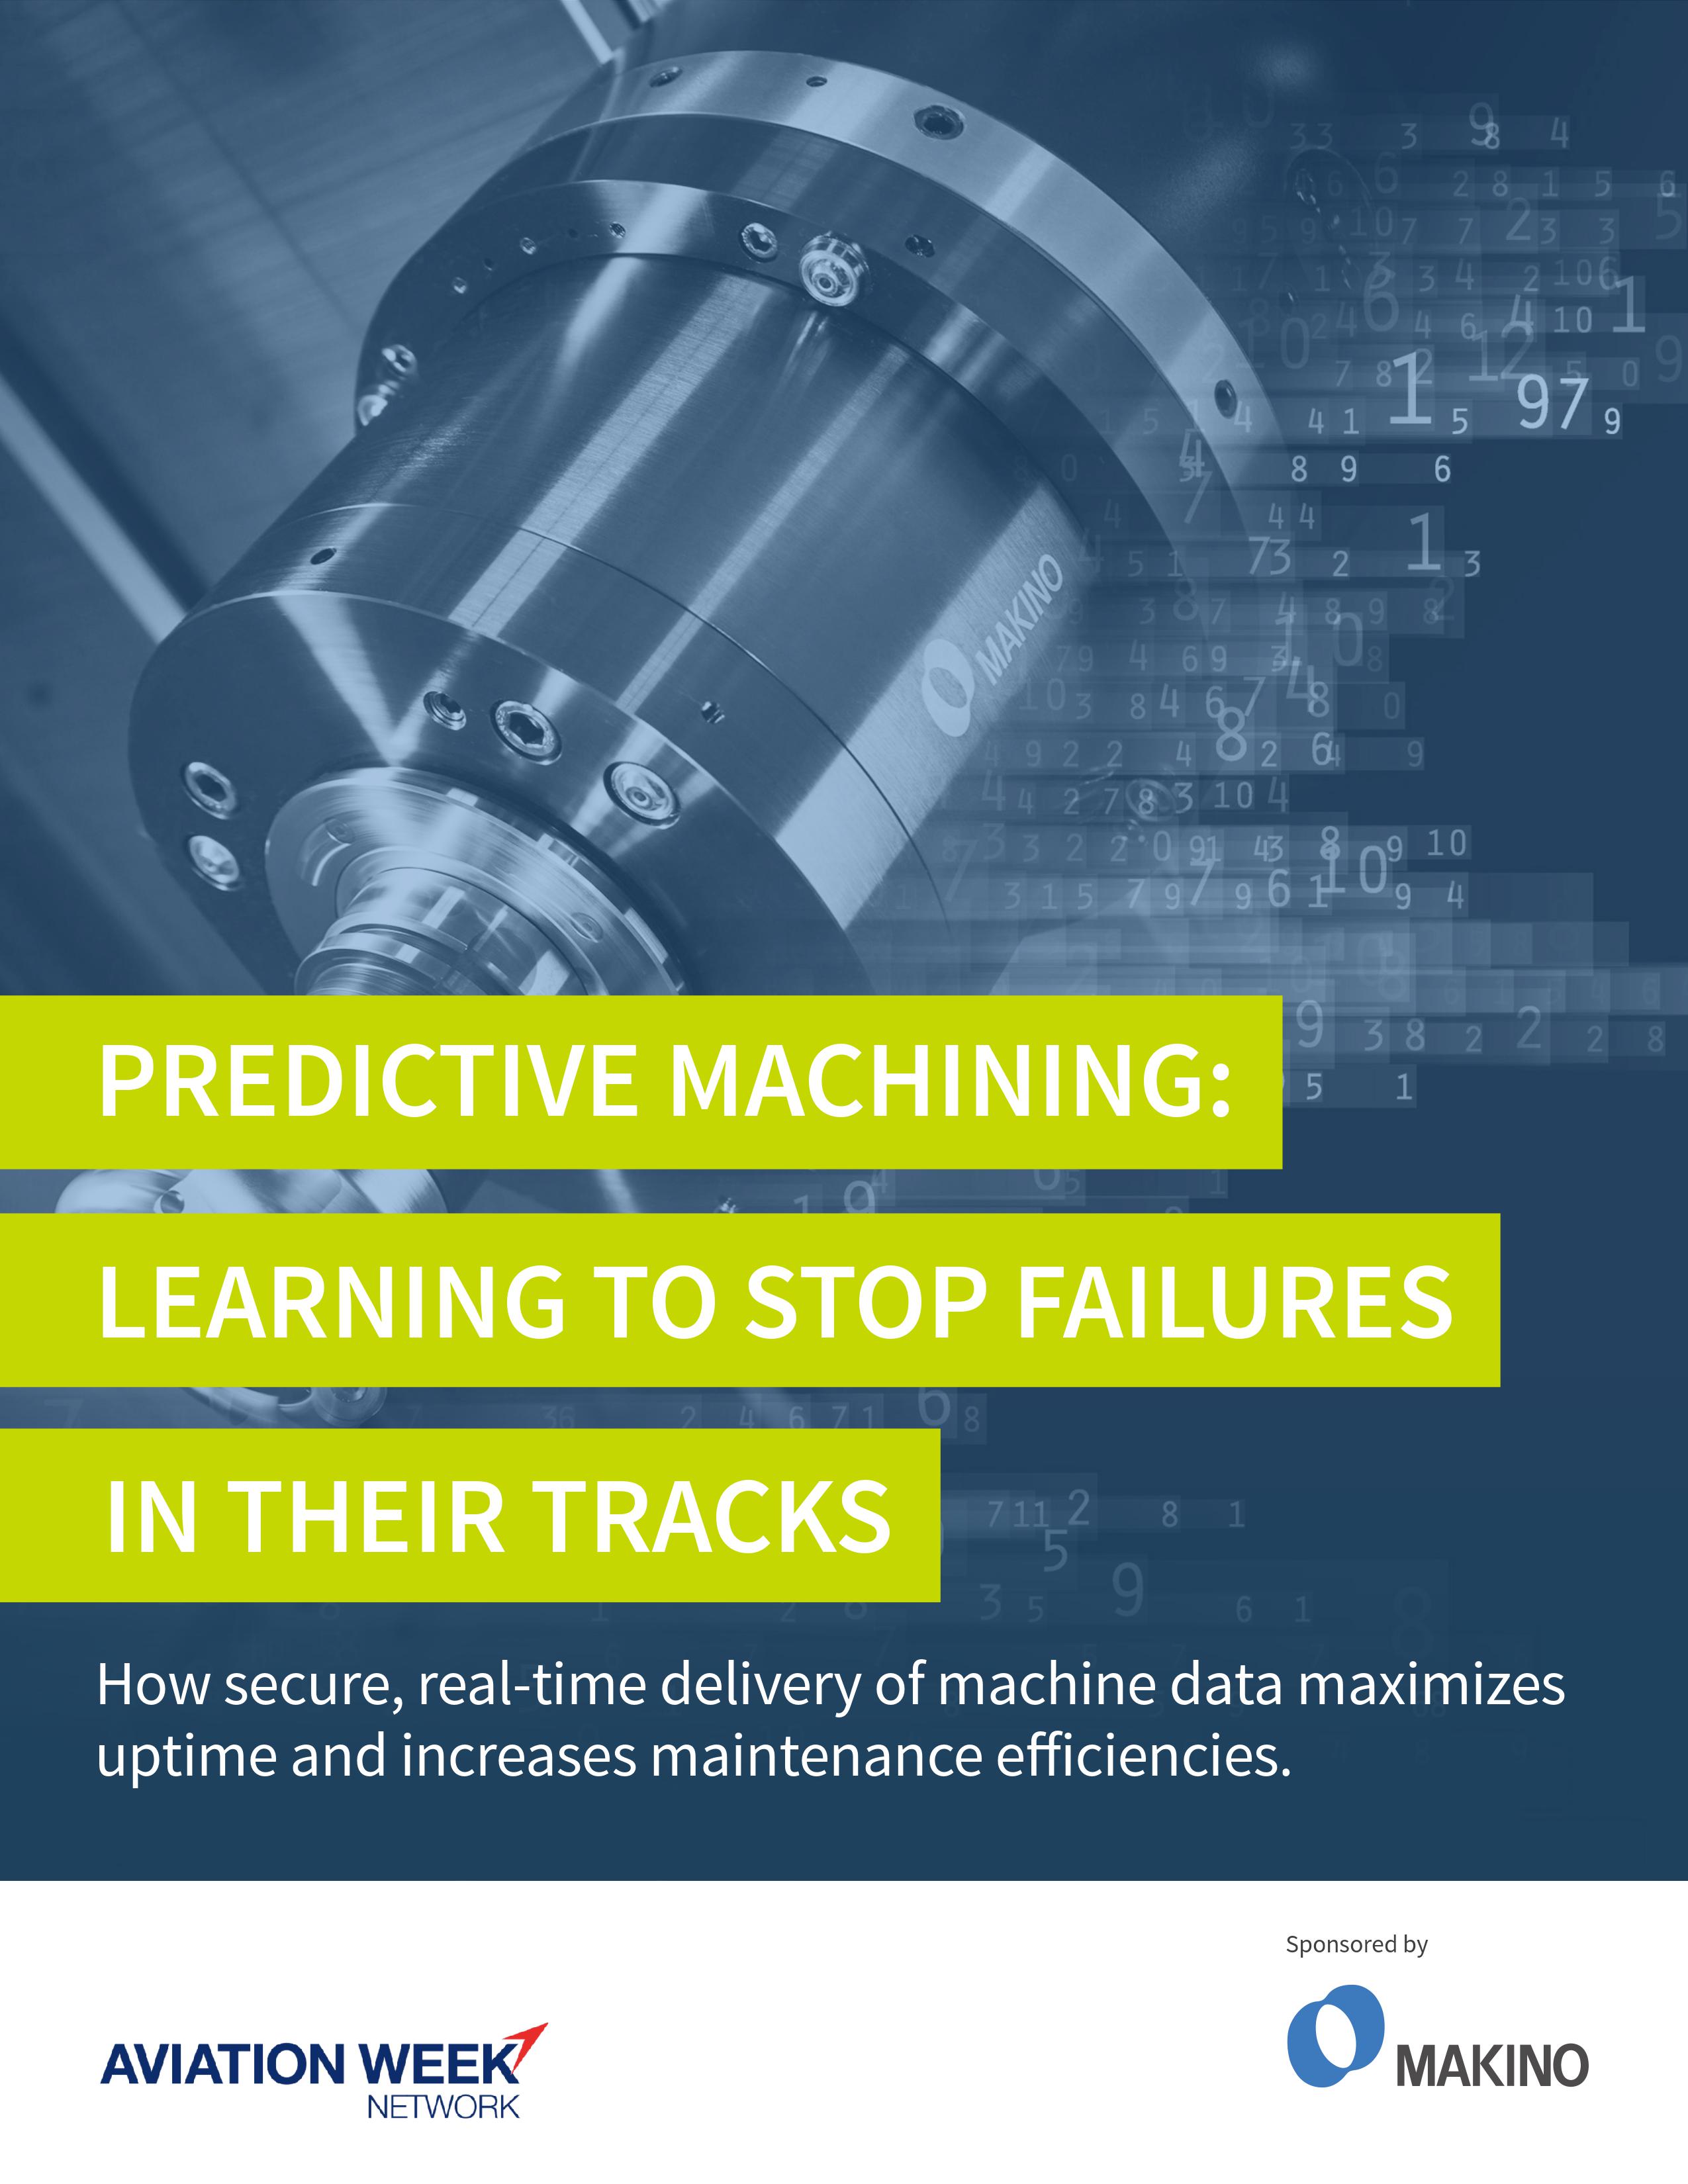 Predictive Machining: How To Stop Failures In Their Tracks